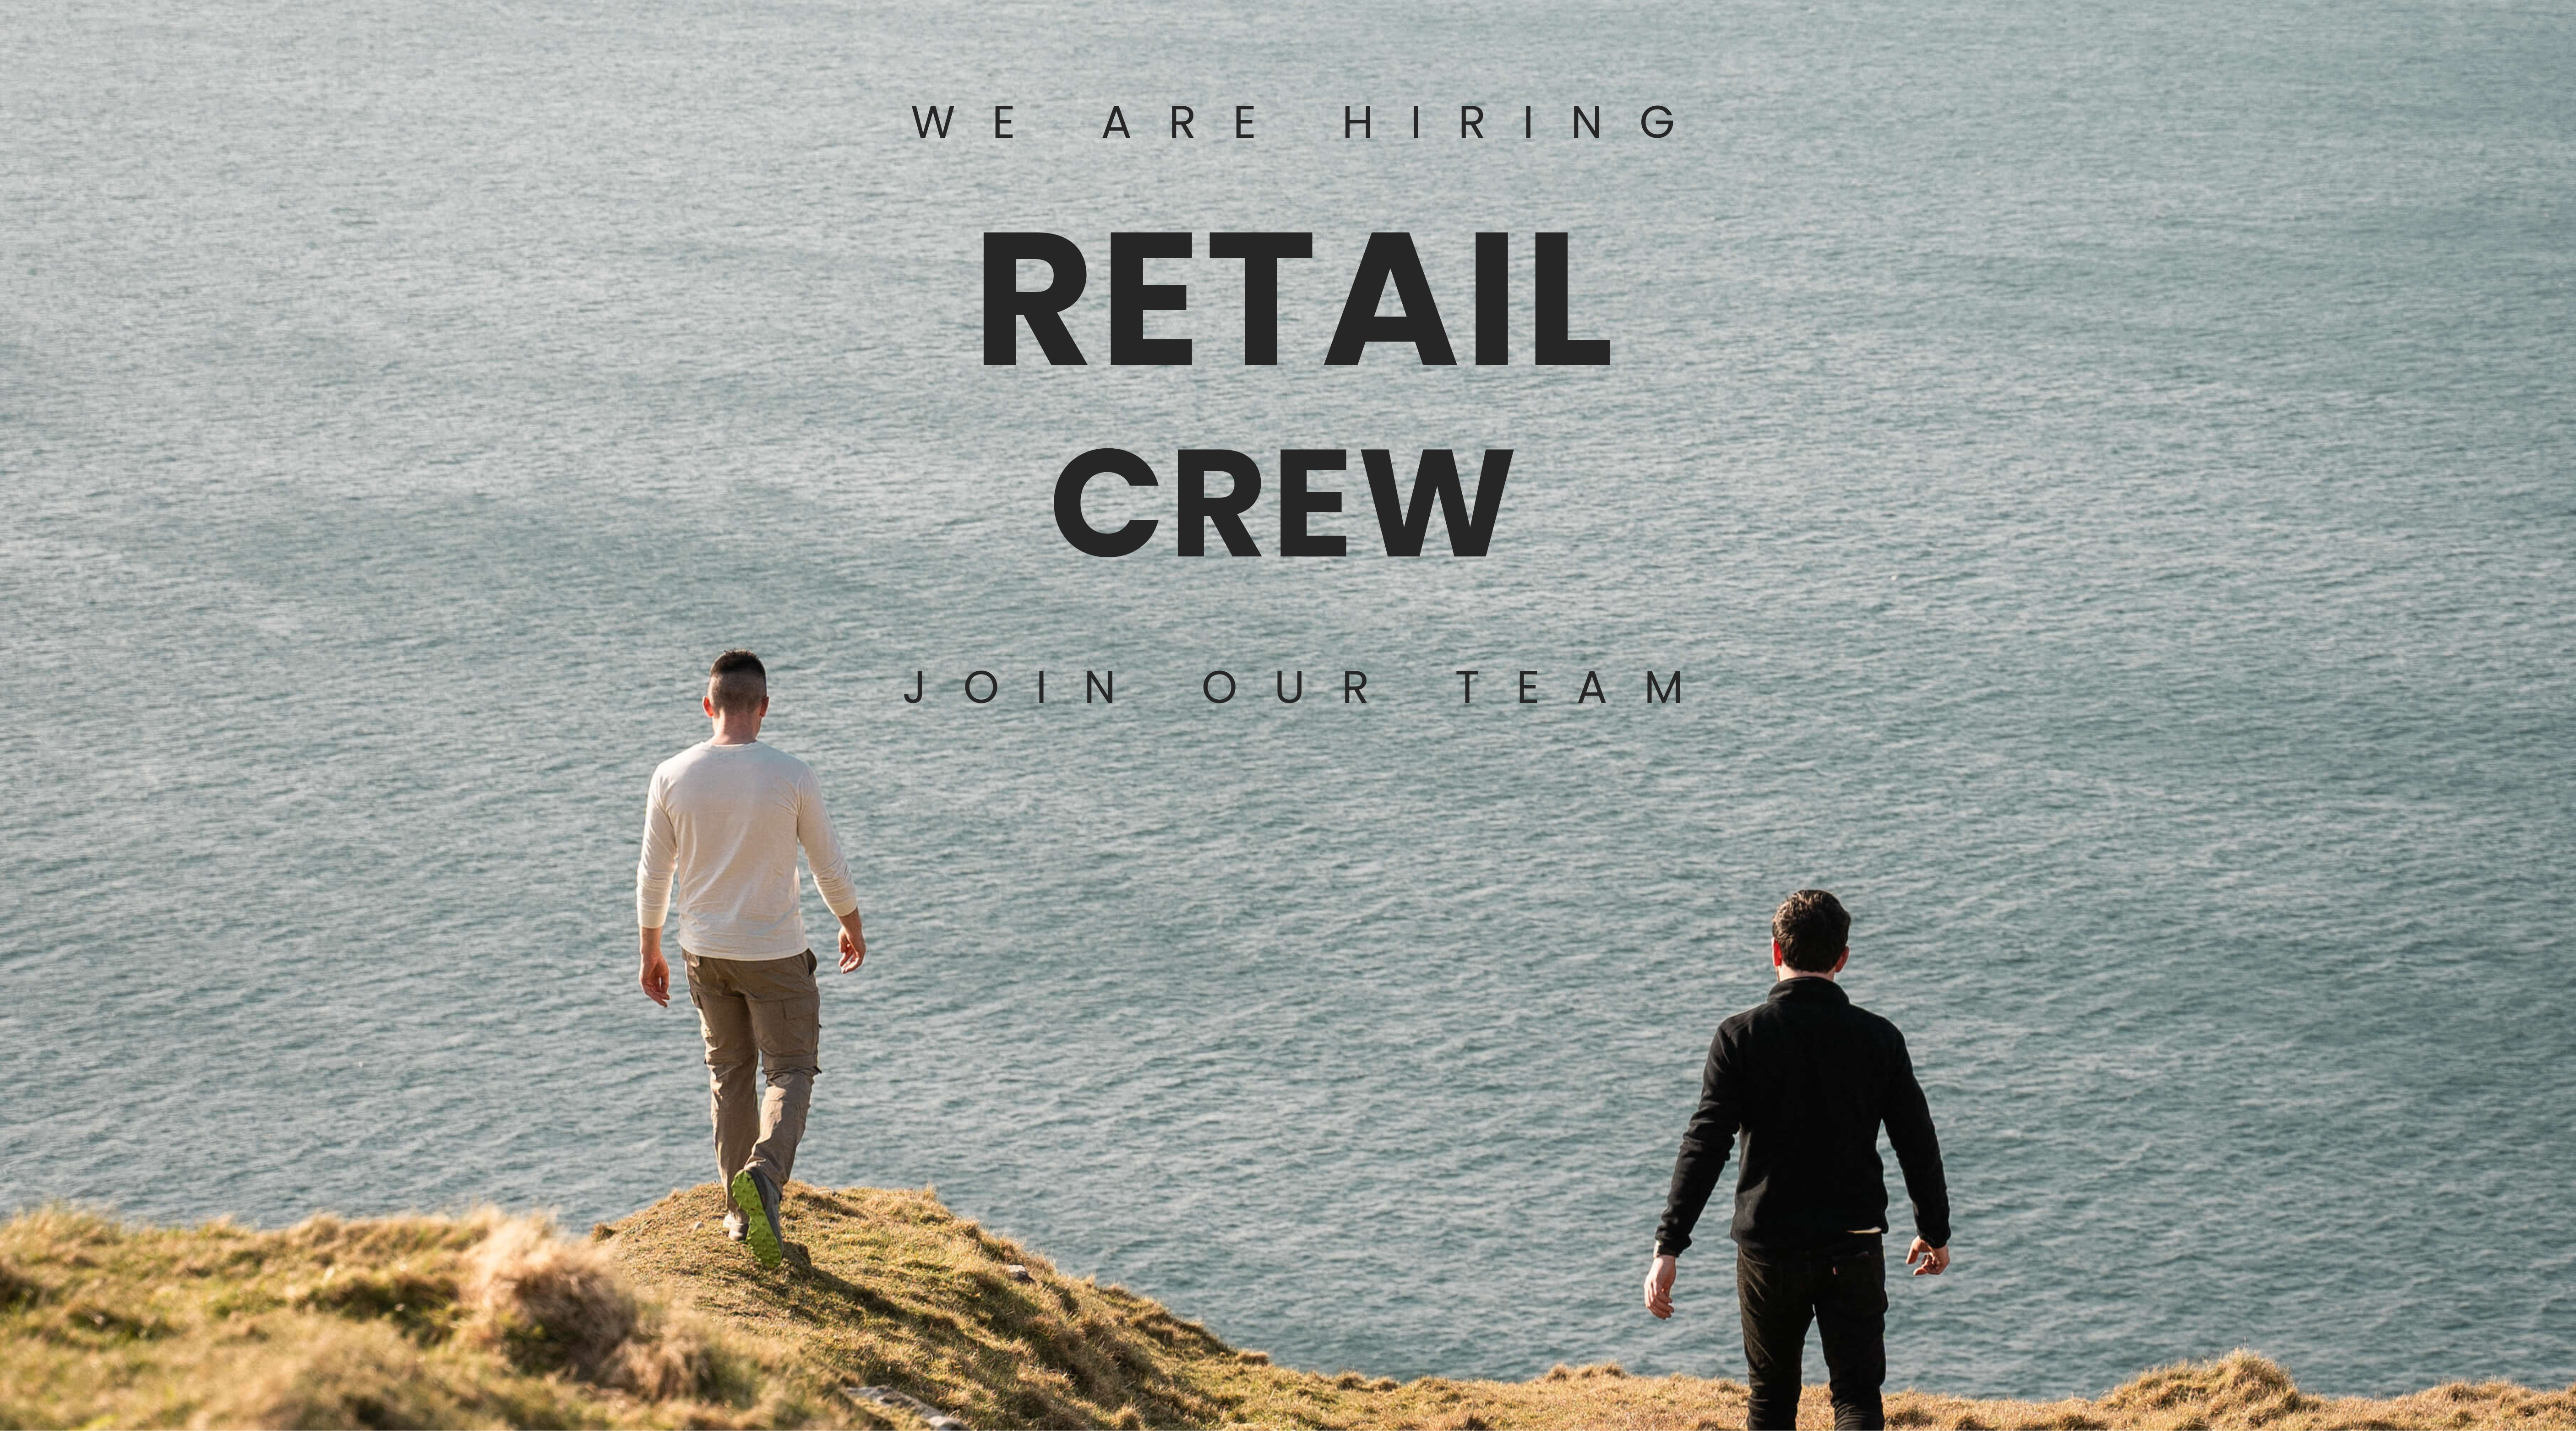 We're Hiring At Outwest - Retail Crew